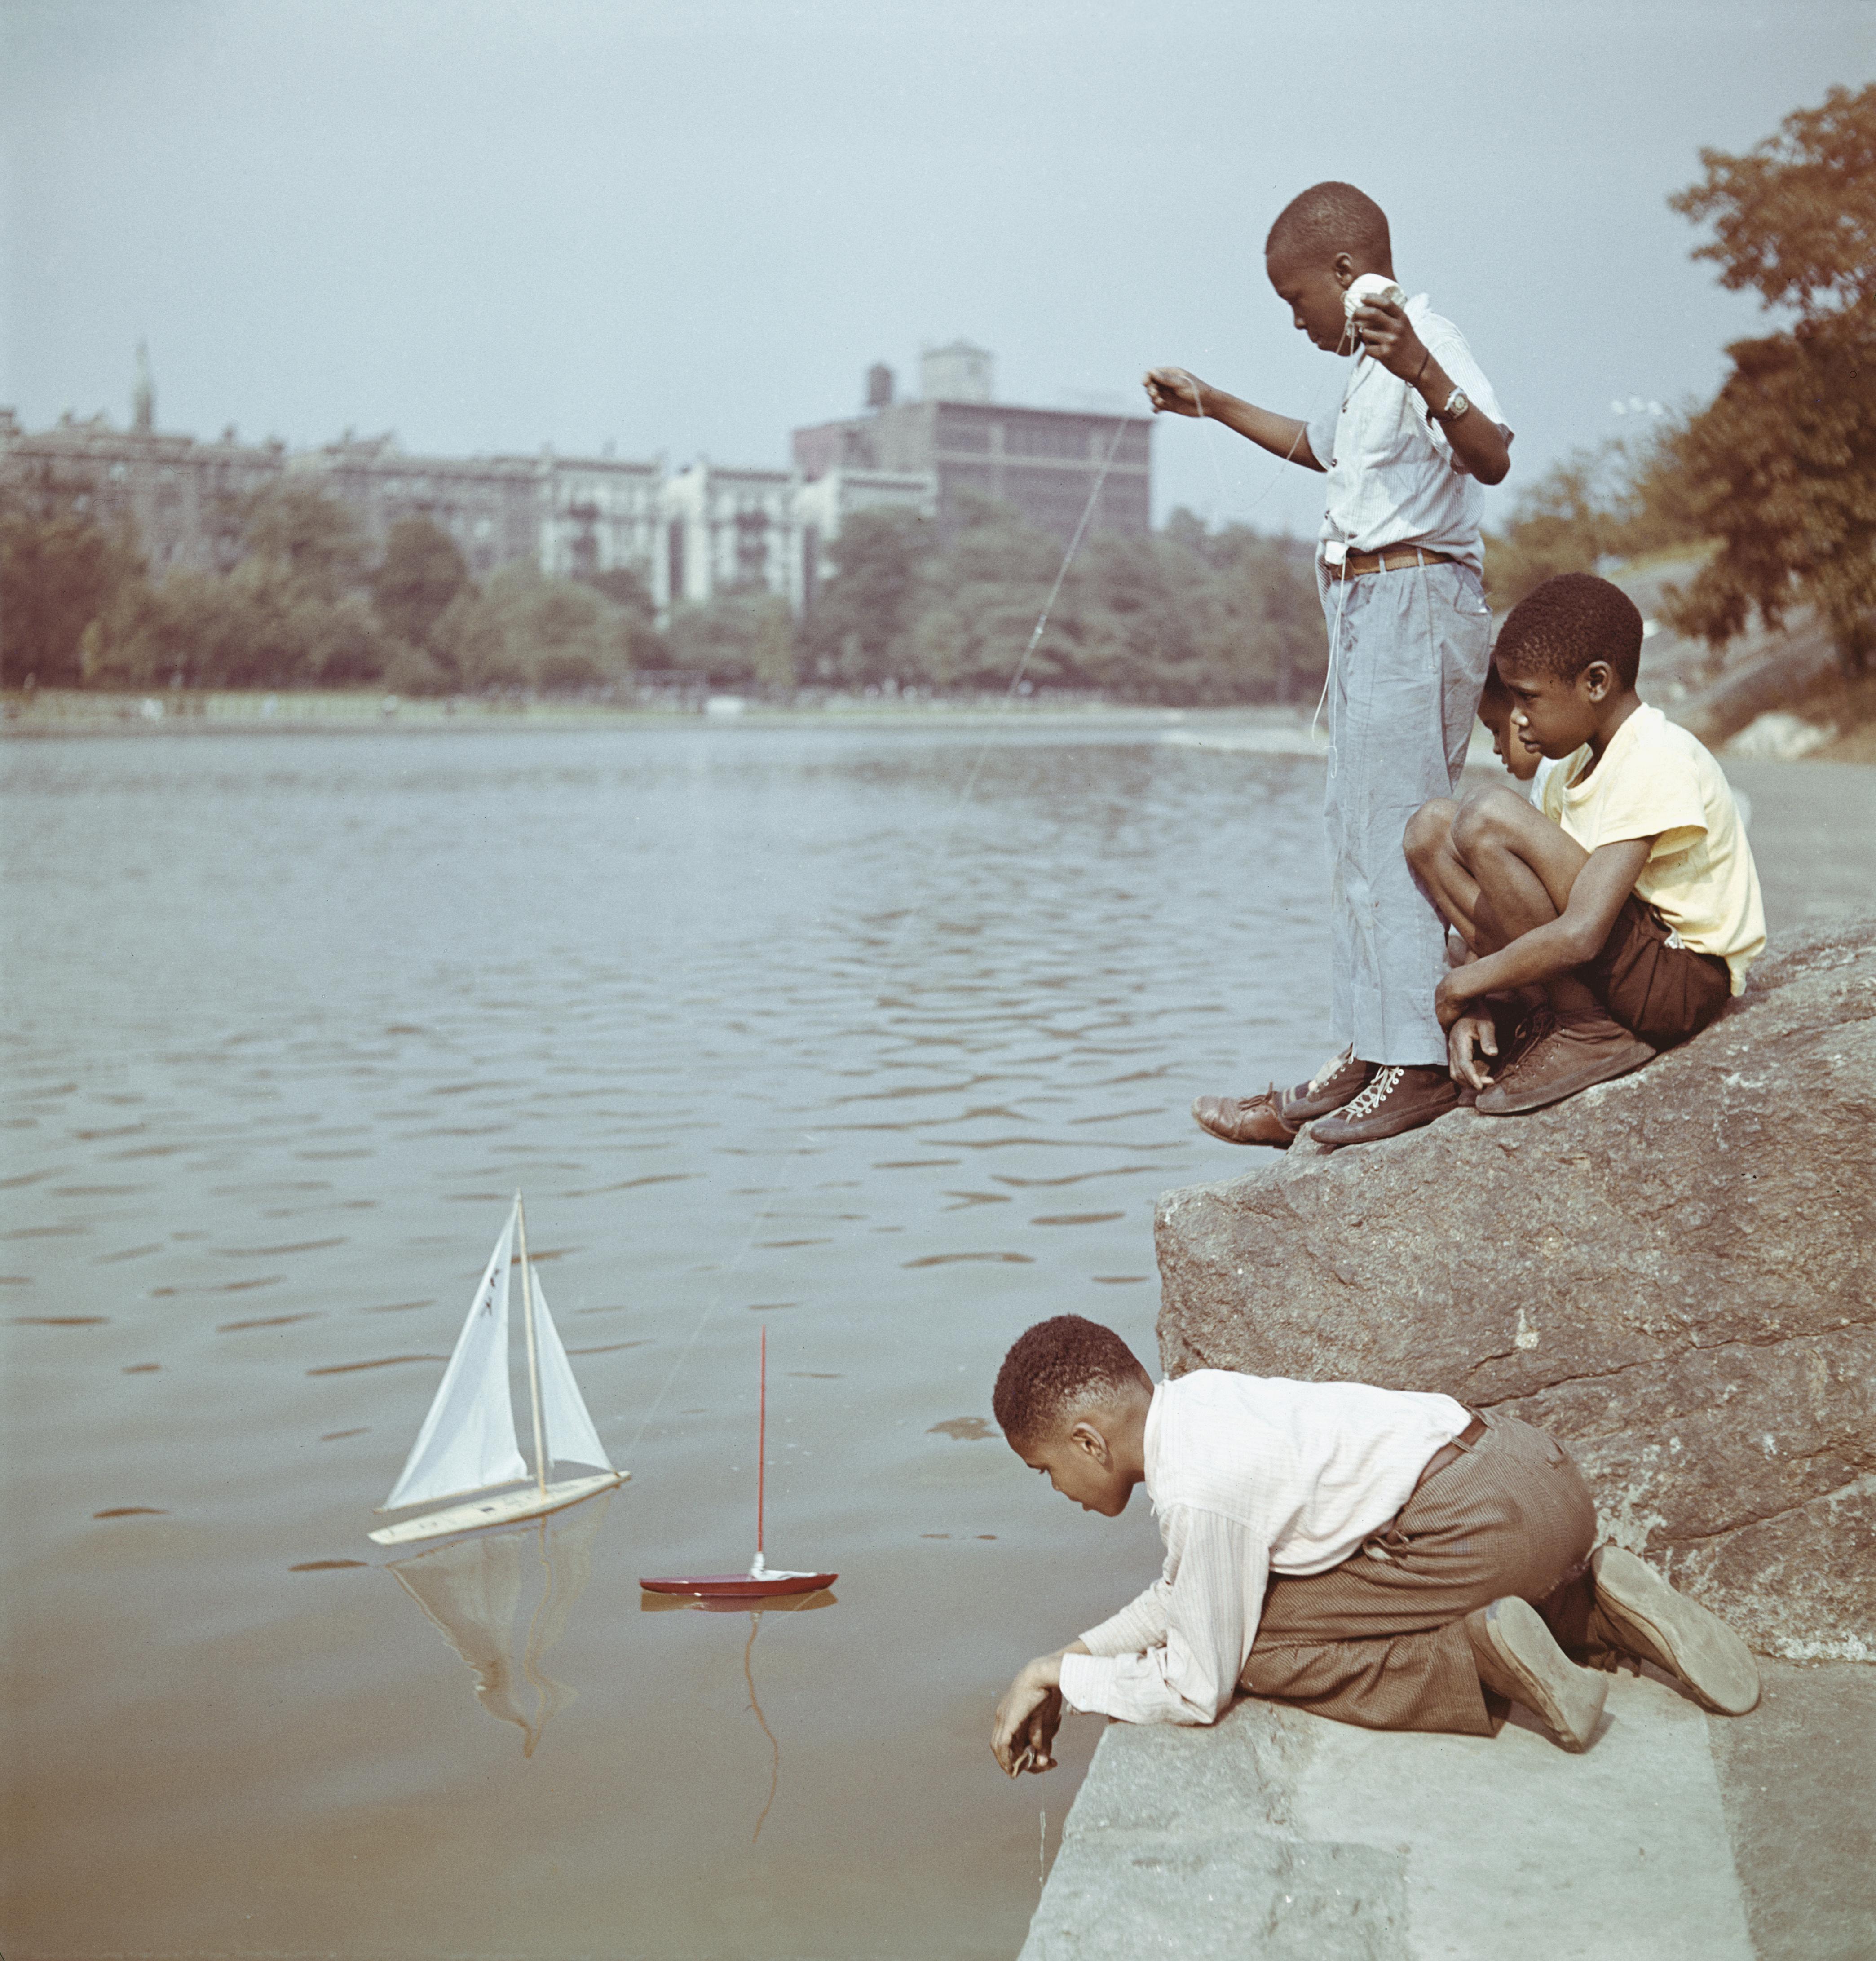 Model Boat Sailing in Central Park NYC, Estate Edition Photograph, Children Play